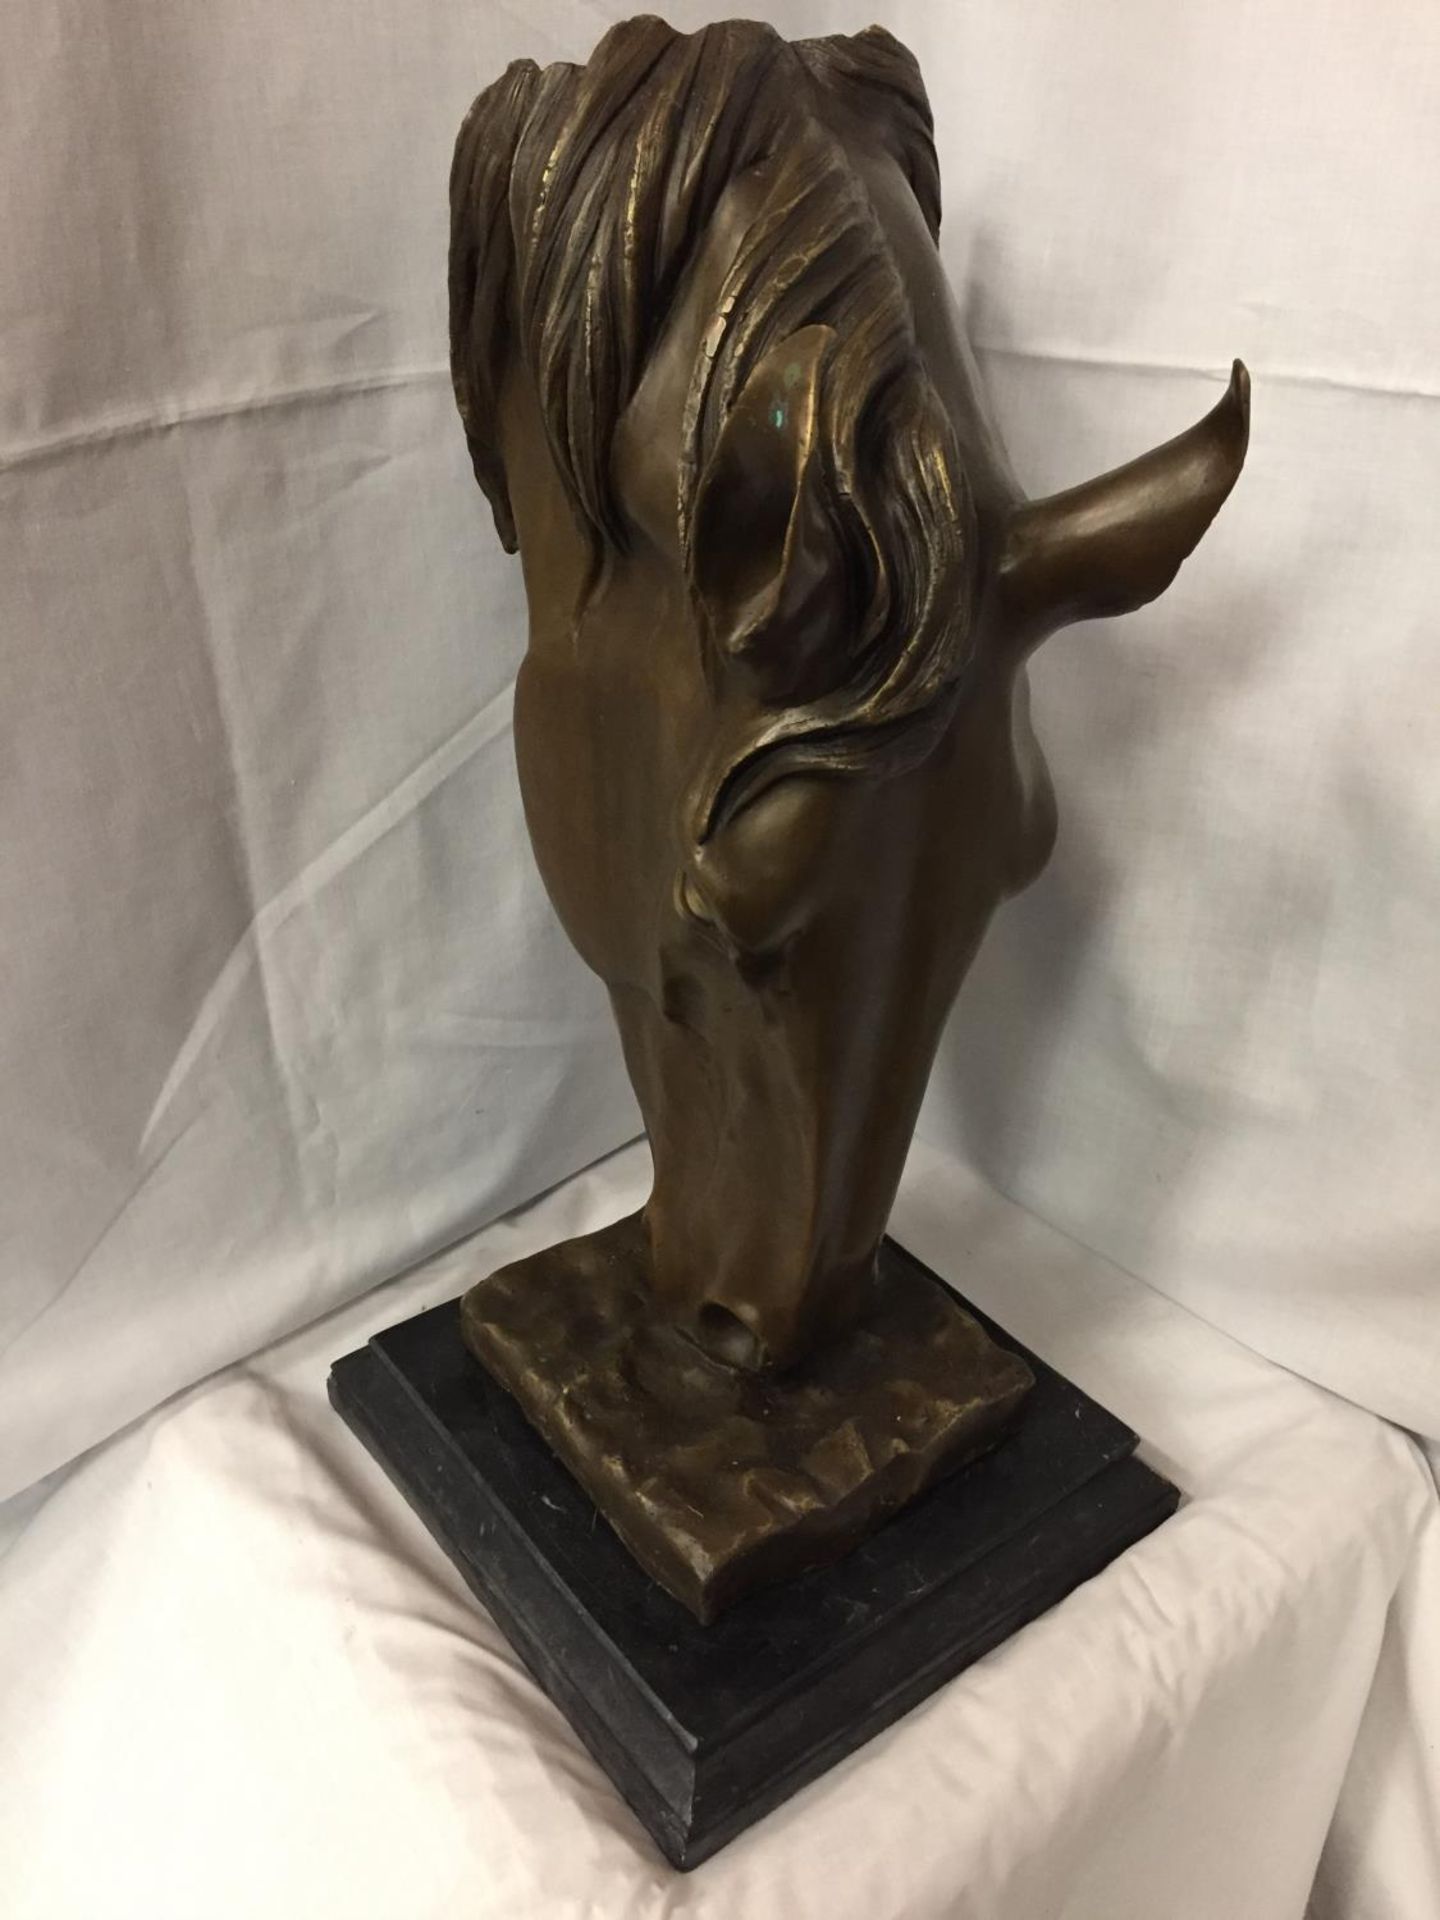 A LARGE BRONZE SCULPTURE OF A HORSE'S HEAD ON A MARBLE BASE 58CM HIGH - Image 2 of 3